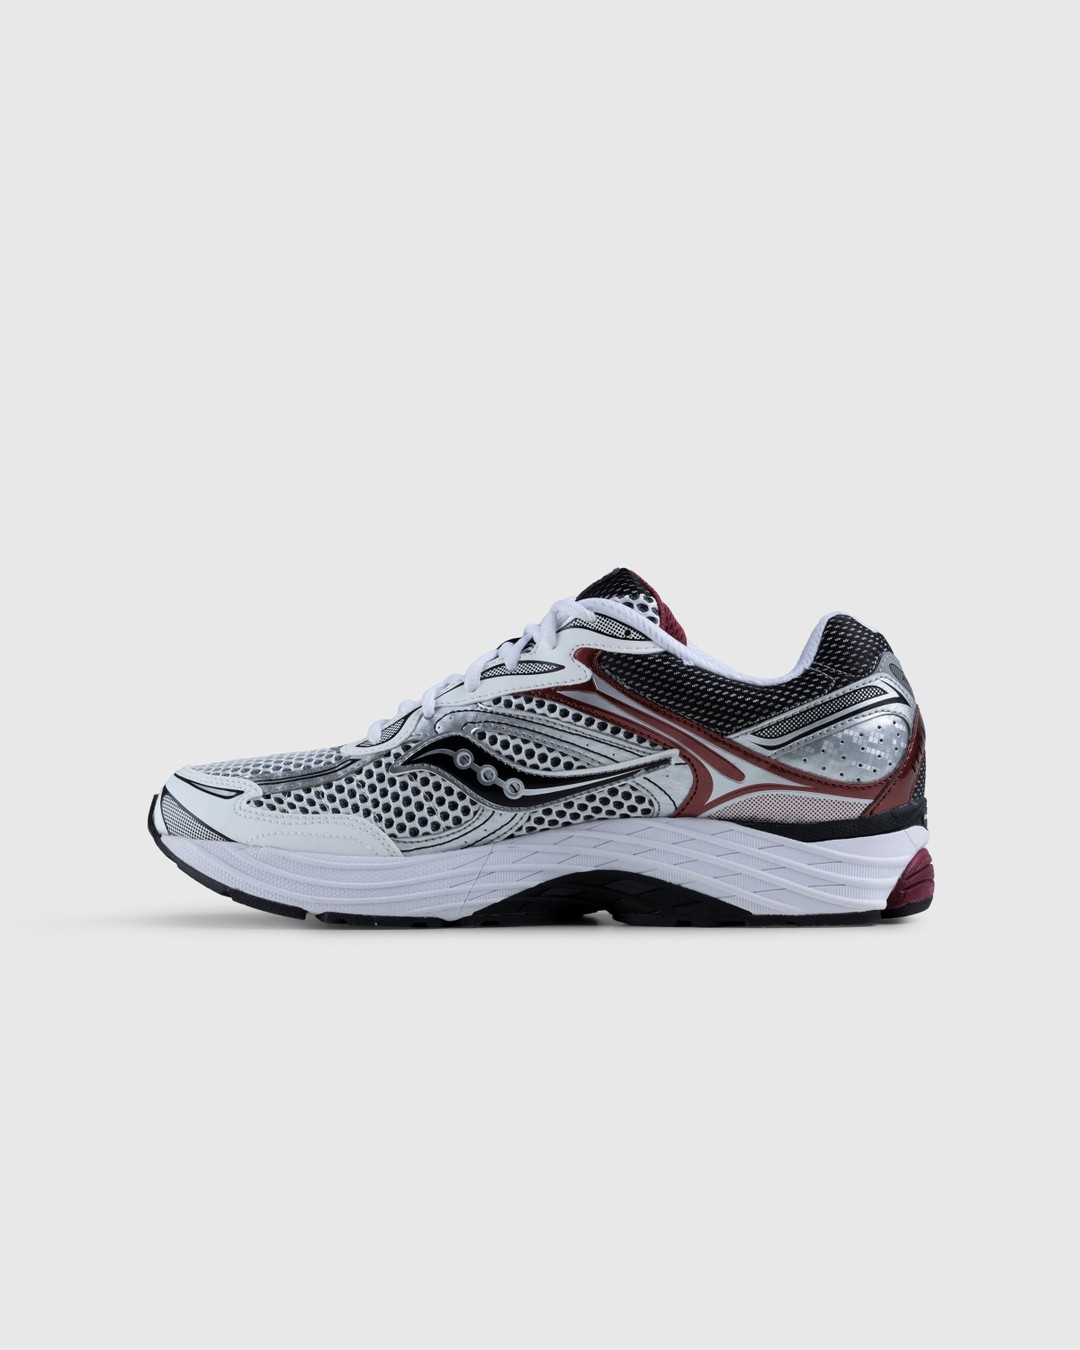 Saucony – ProGrid Omni 9 Silver/Red - Sneakers - Multi - Image 2